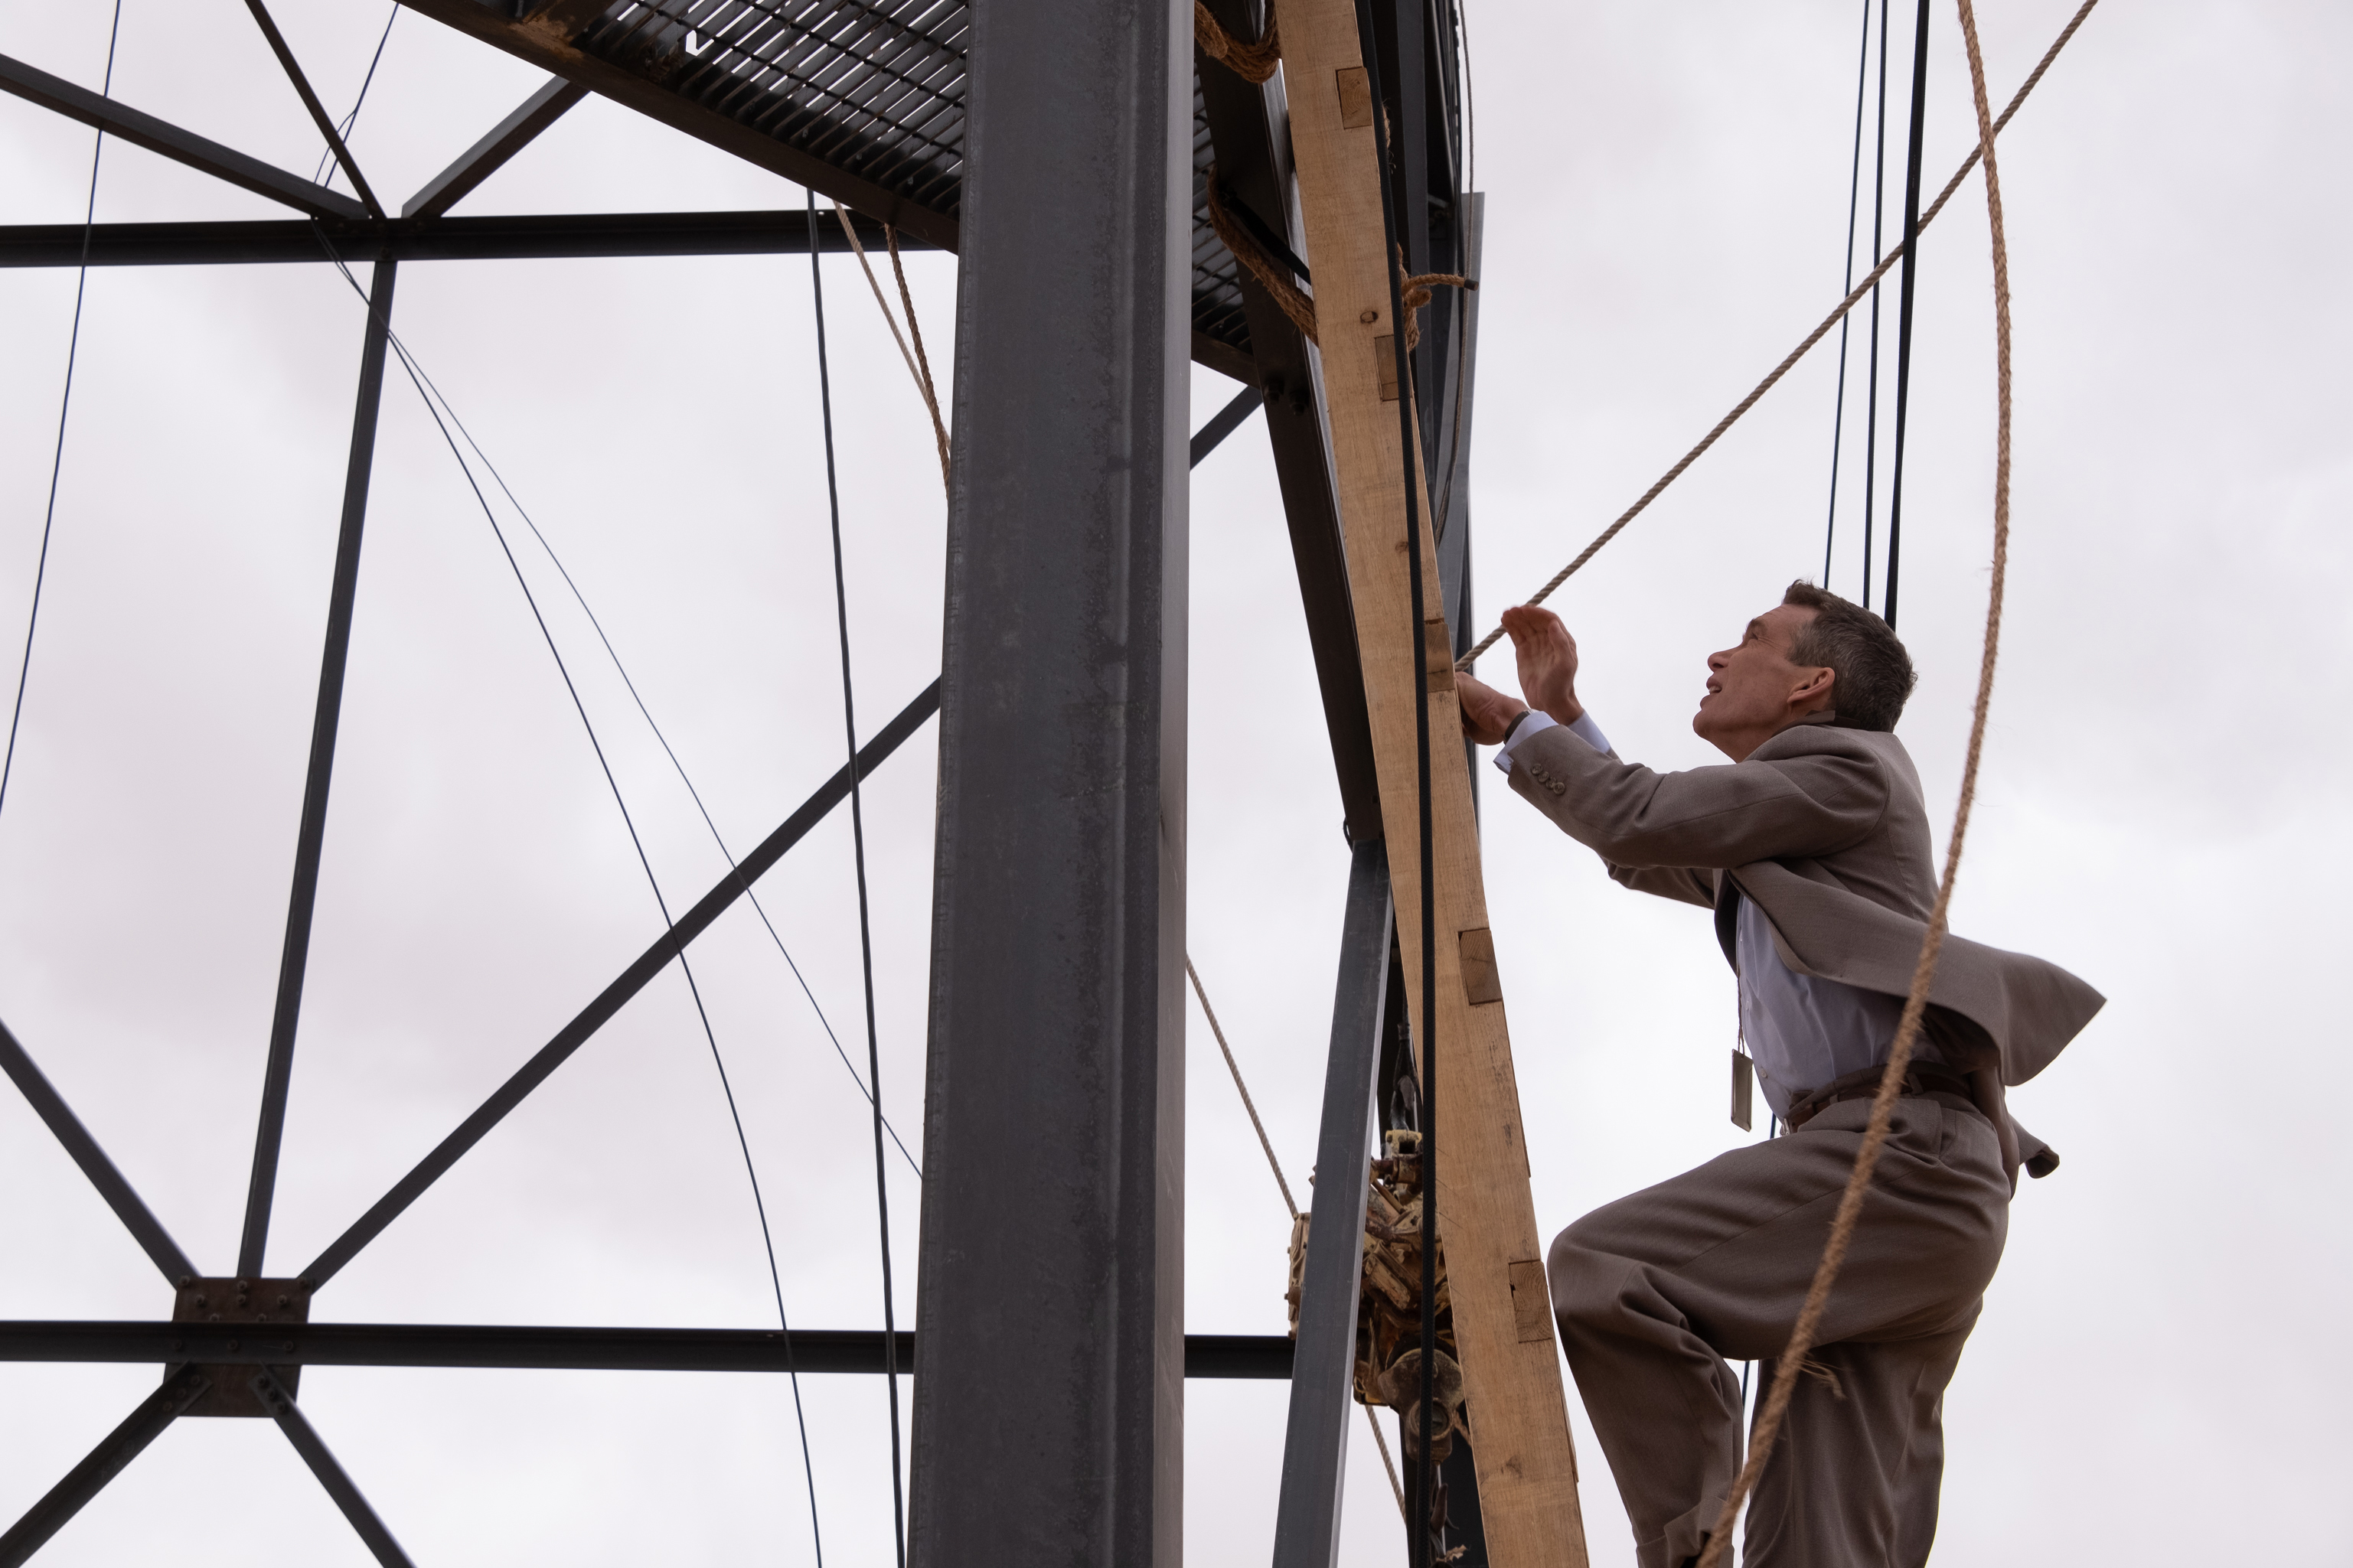 HD wallpaper of a man in a suit climbing a ladder on a scaffolding structure under a cloudy sky, tagged with Oppenheimer.